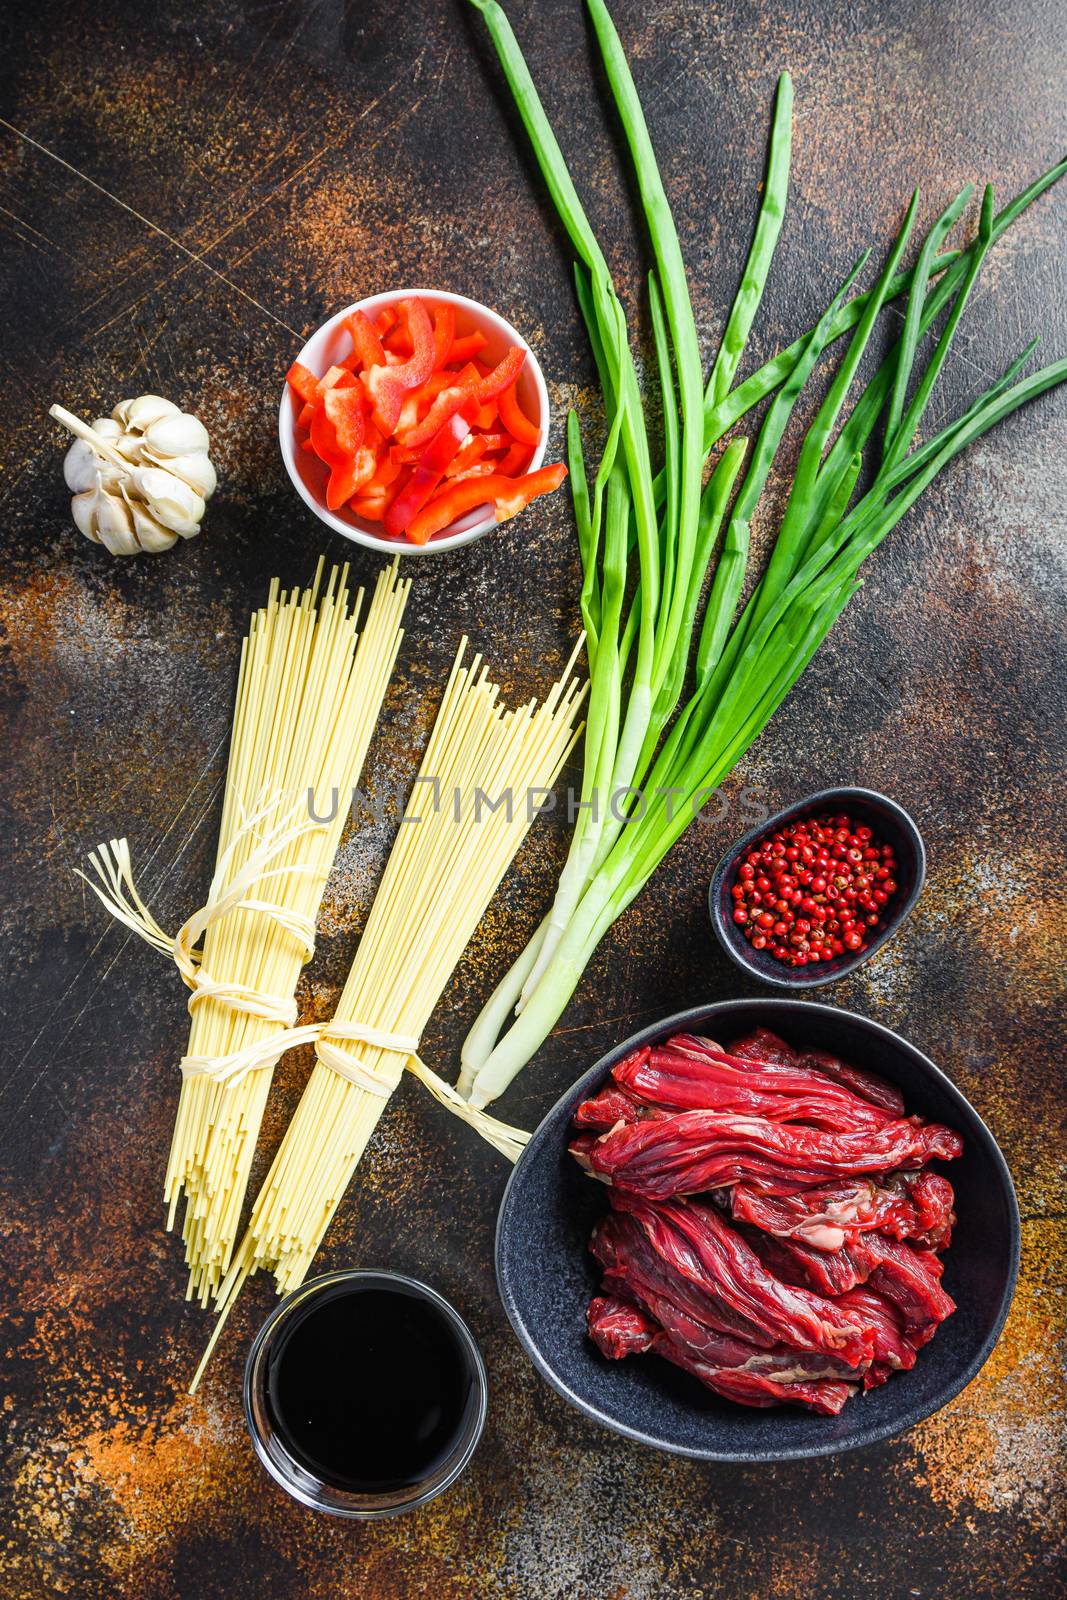 Raw ingredients for stir fry Chinese noodles with vegetables and beef in black bowl. On old rustic table. by Ilianesolenyi